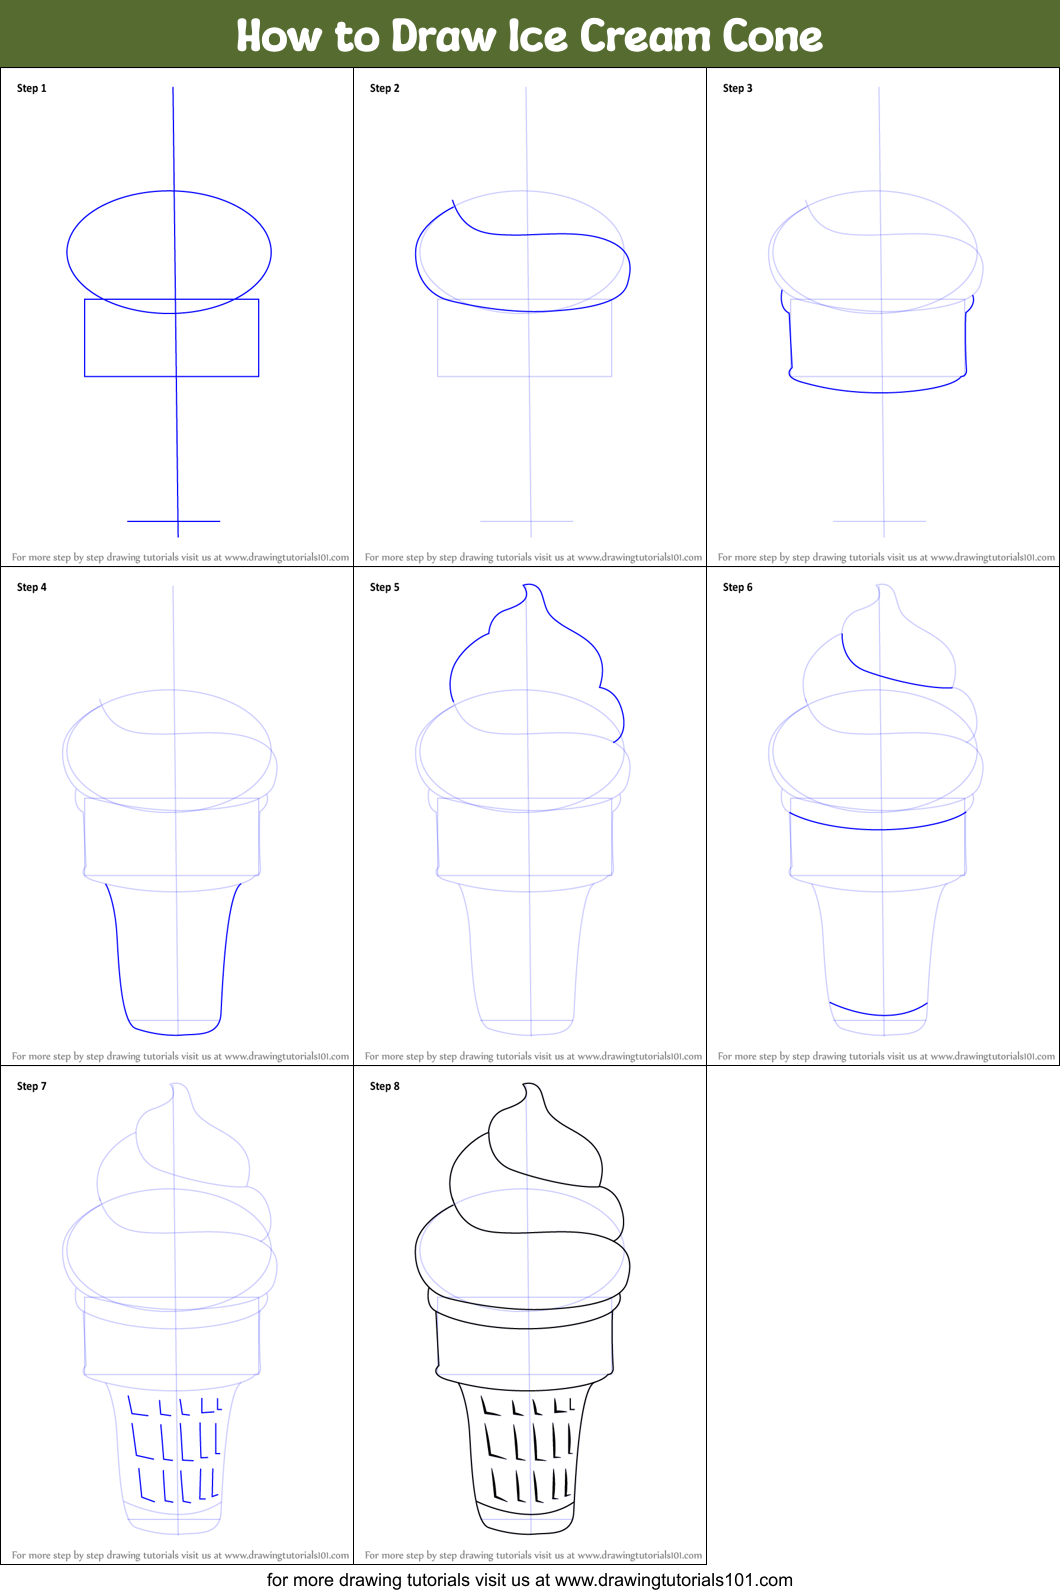 How To Draw Ice Cream Cone Printable Step By Step Drawing Sheet Drawingtutorials101 Com